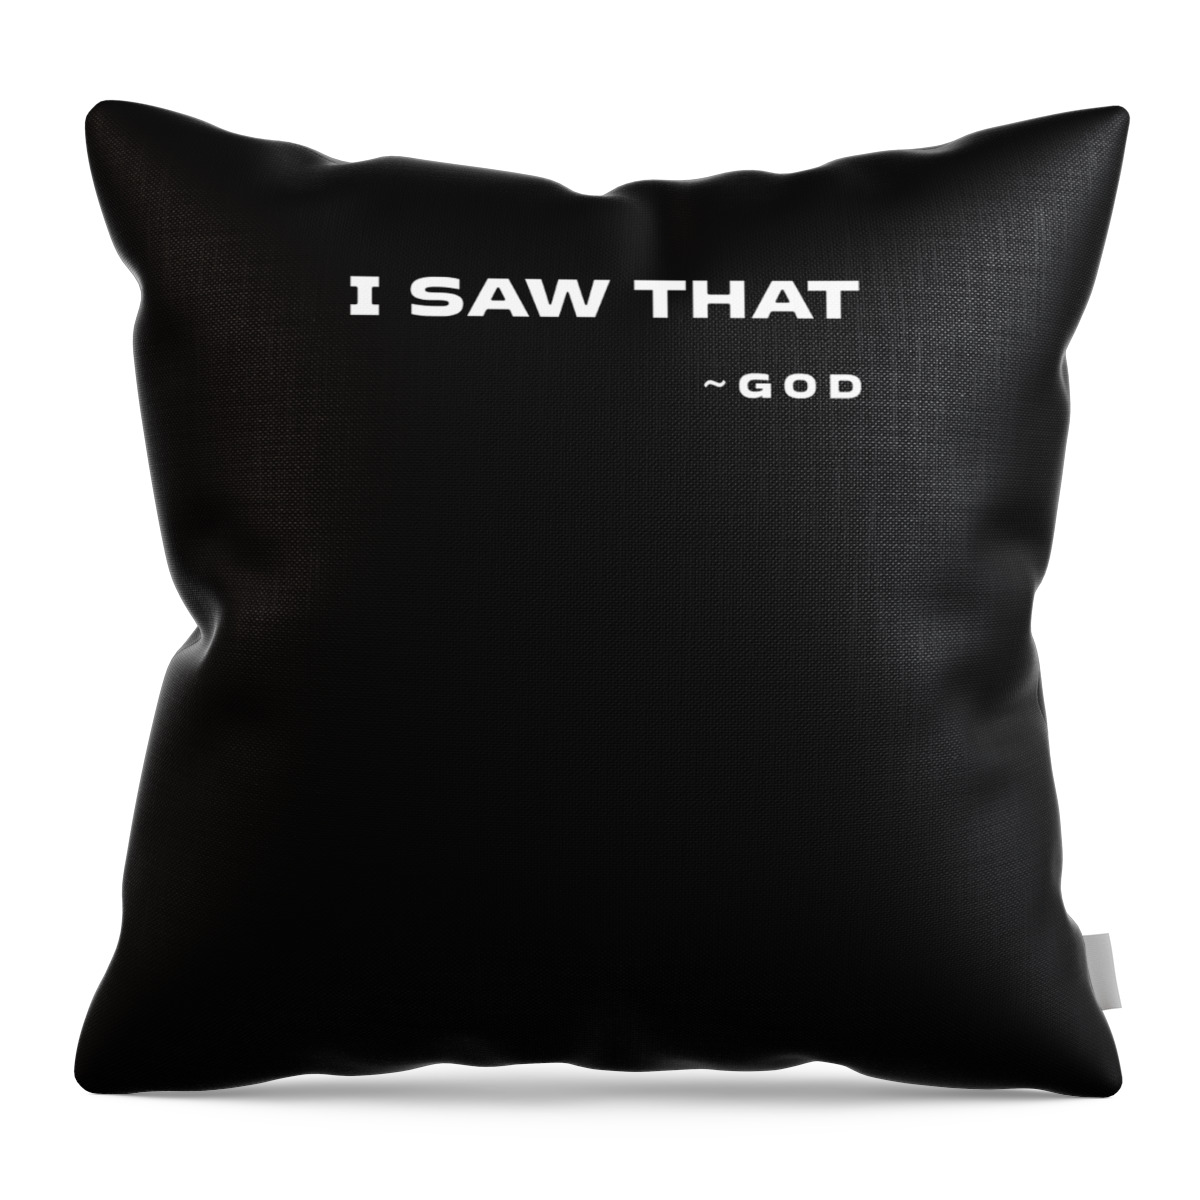 I Saw That Throw Pillow featuring the digital art I Saw That - Funny, Humorous Christian Quote - Faith-Based Print by Studio Grafiikka